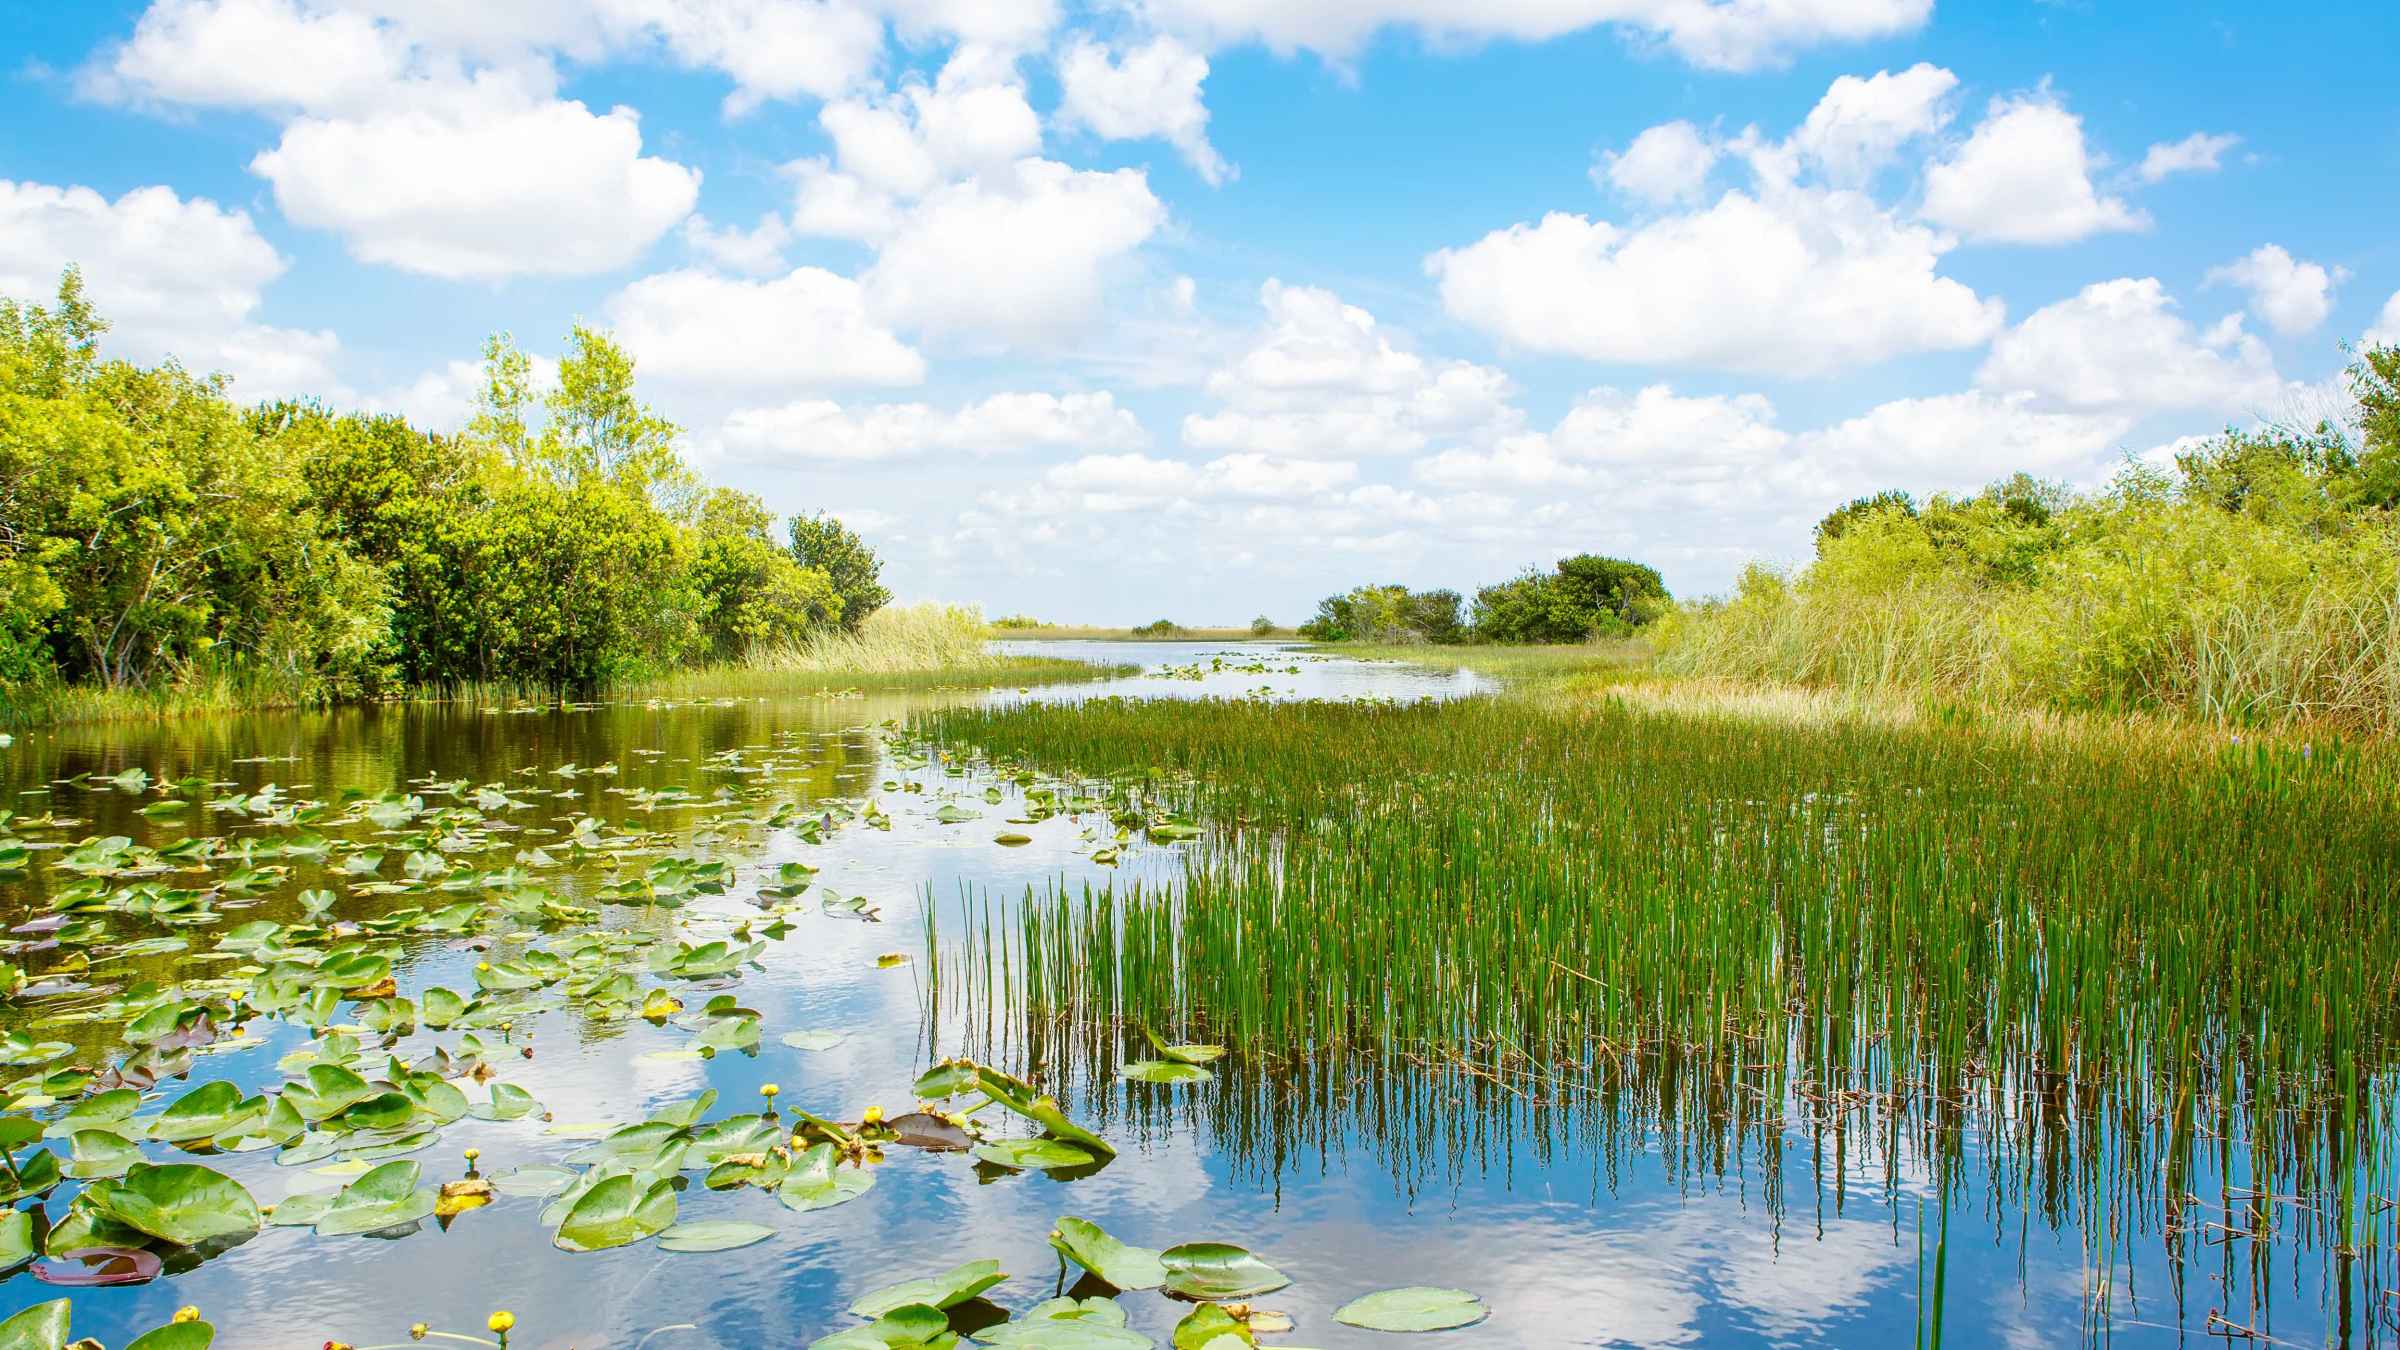 The Everglades 2021: Top 10 Tours & Activities (with Photos) - Things